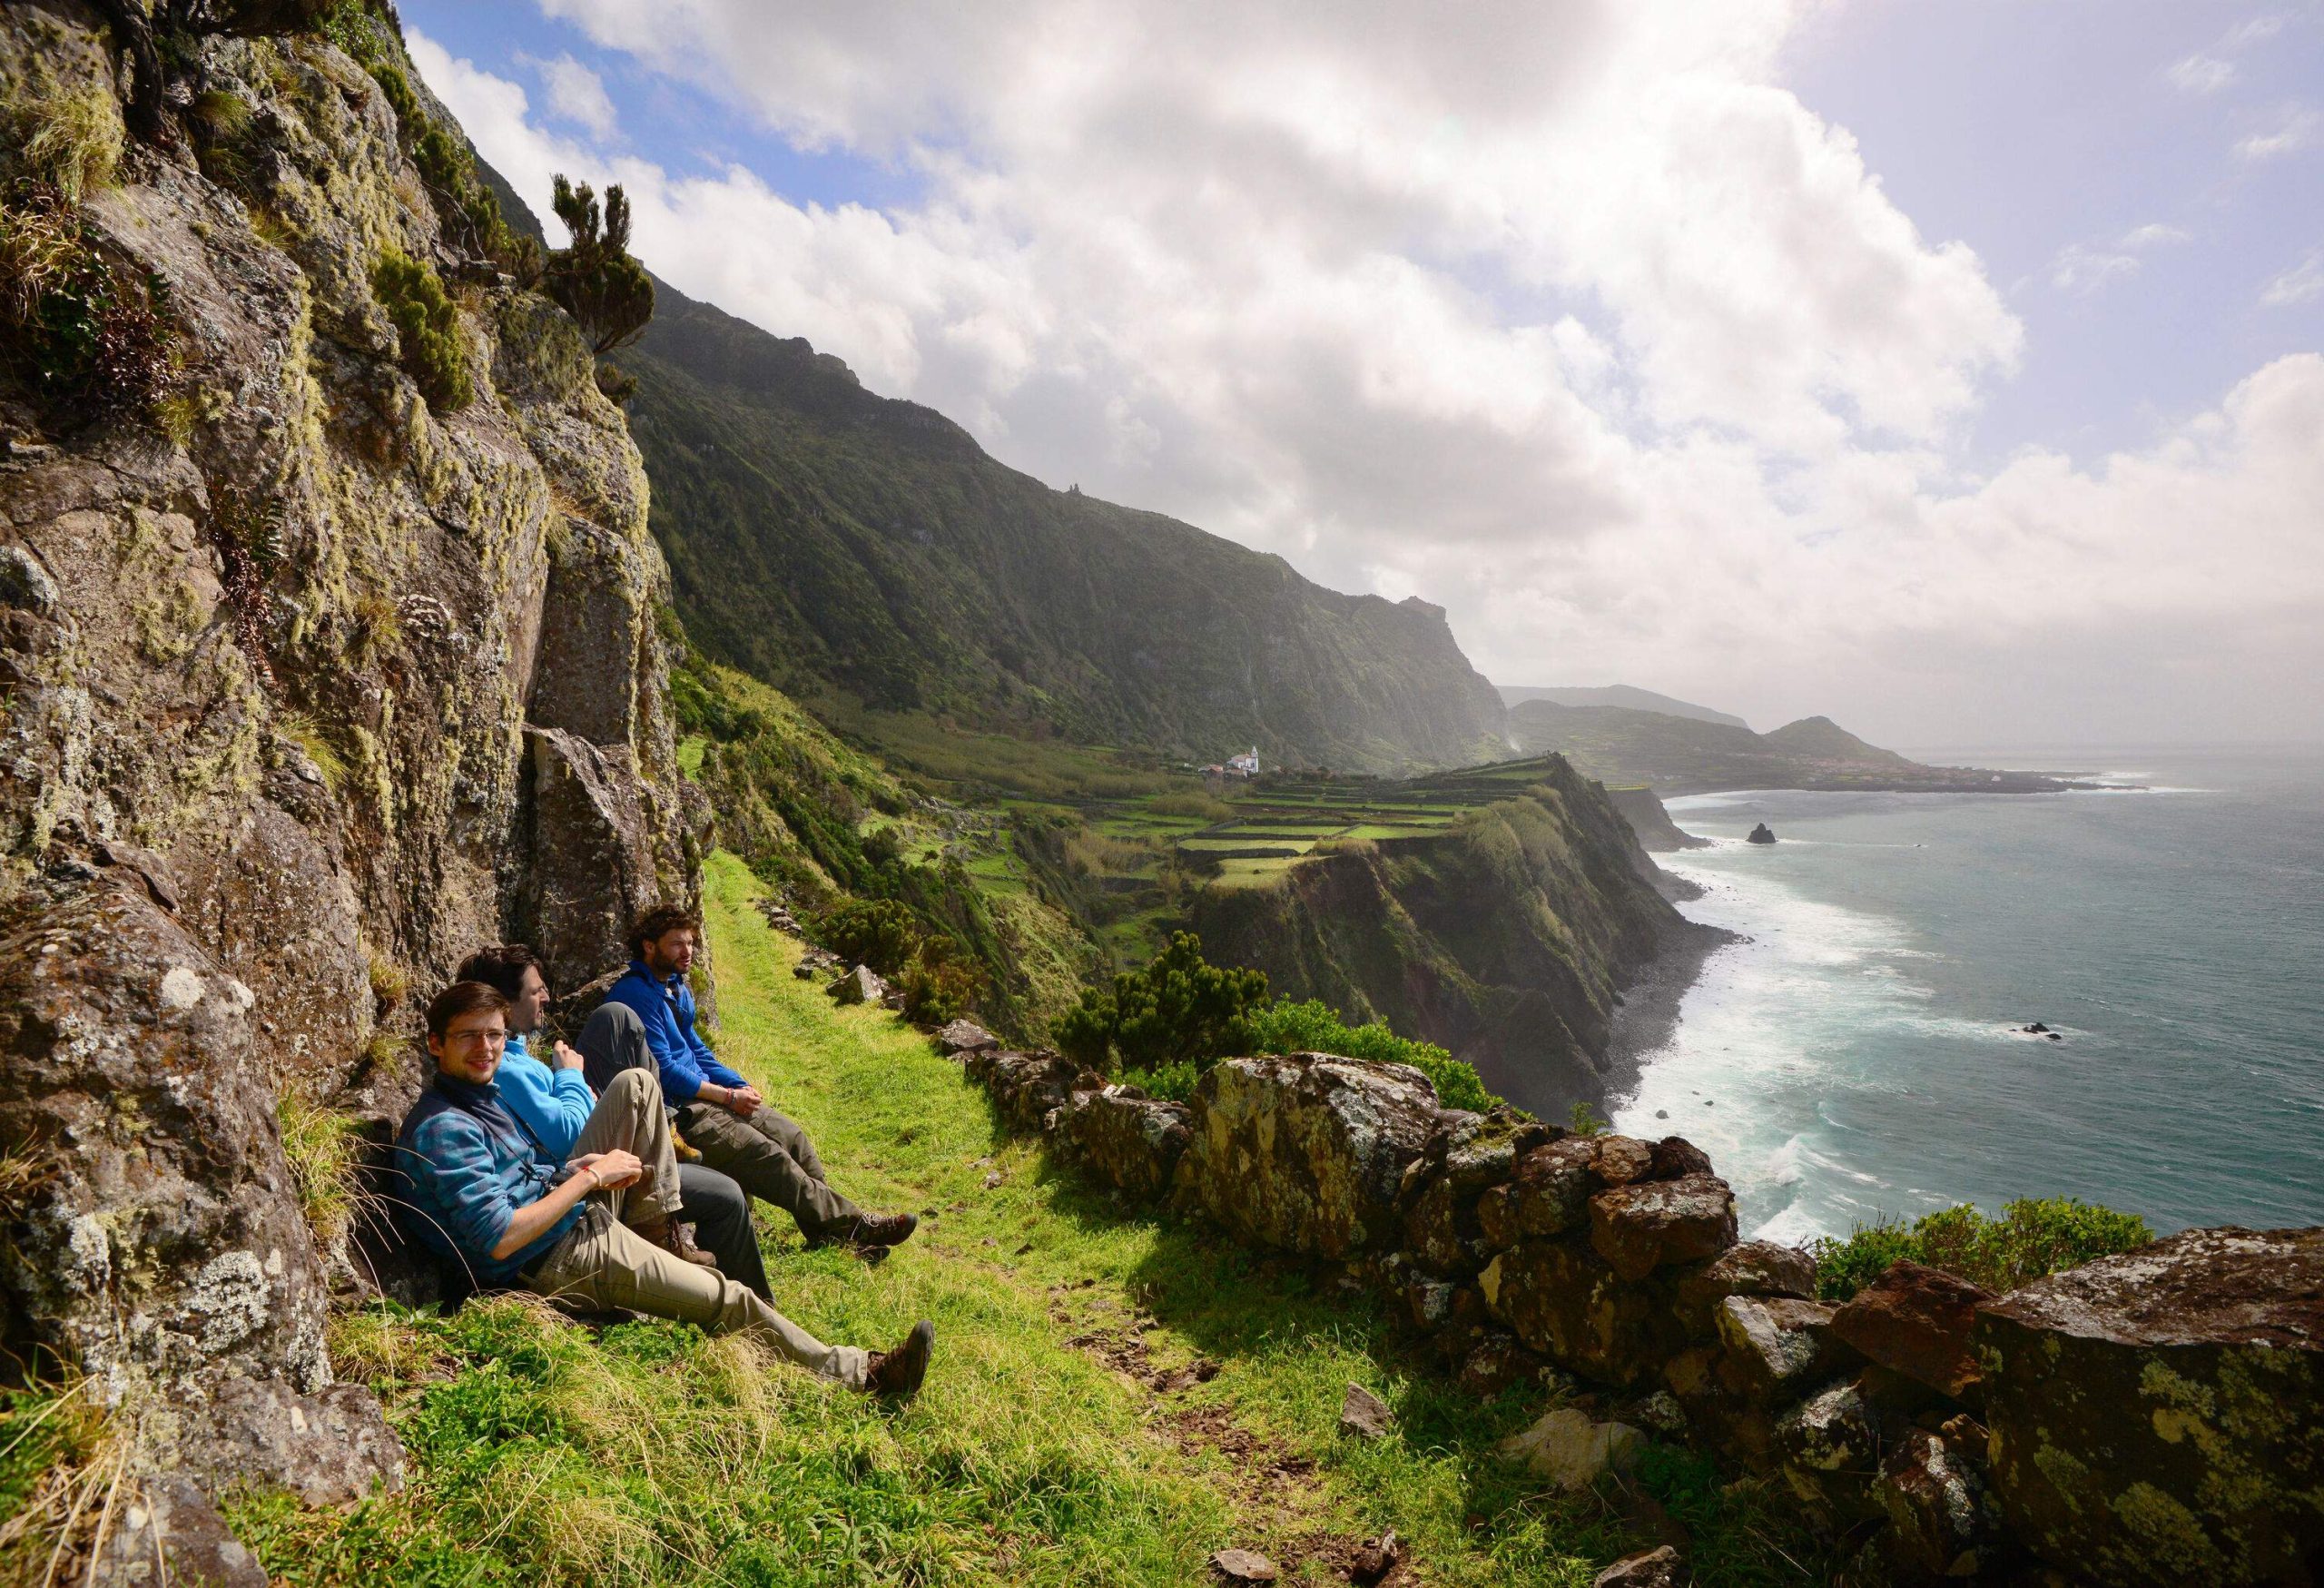 Three individual leans on the rock wall of a lush island cliff overlooking the sea against the cloudy sky.